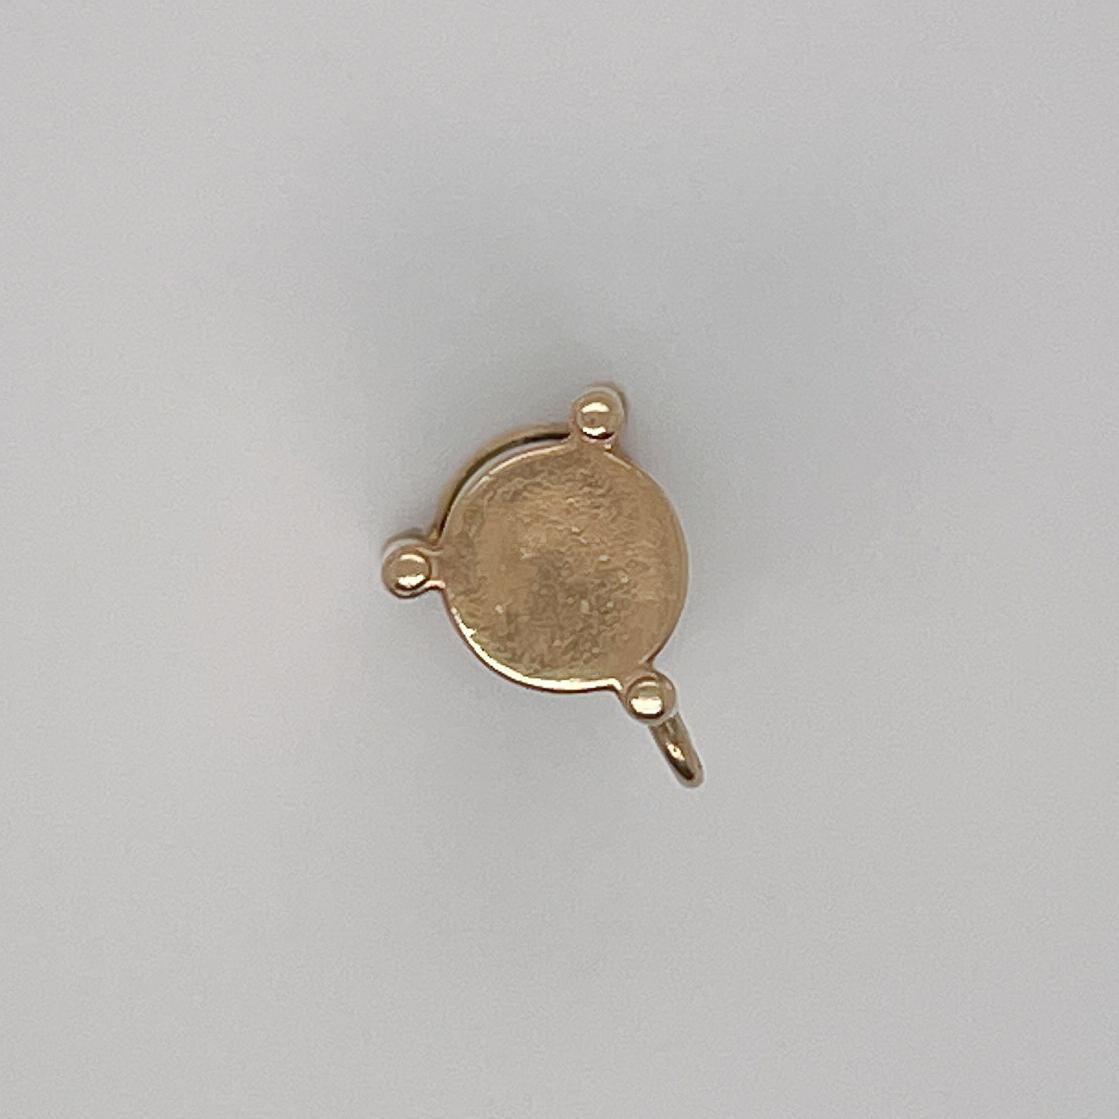 Women's Vintage 14K Gold Charm of an Hour Glass for a Bracelet